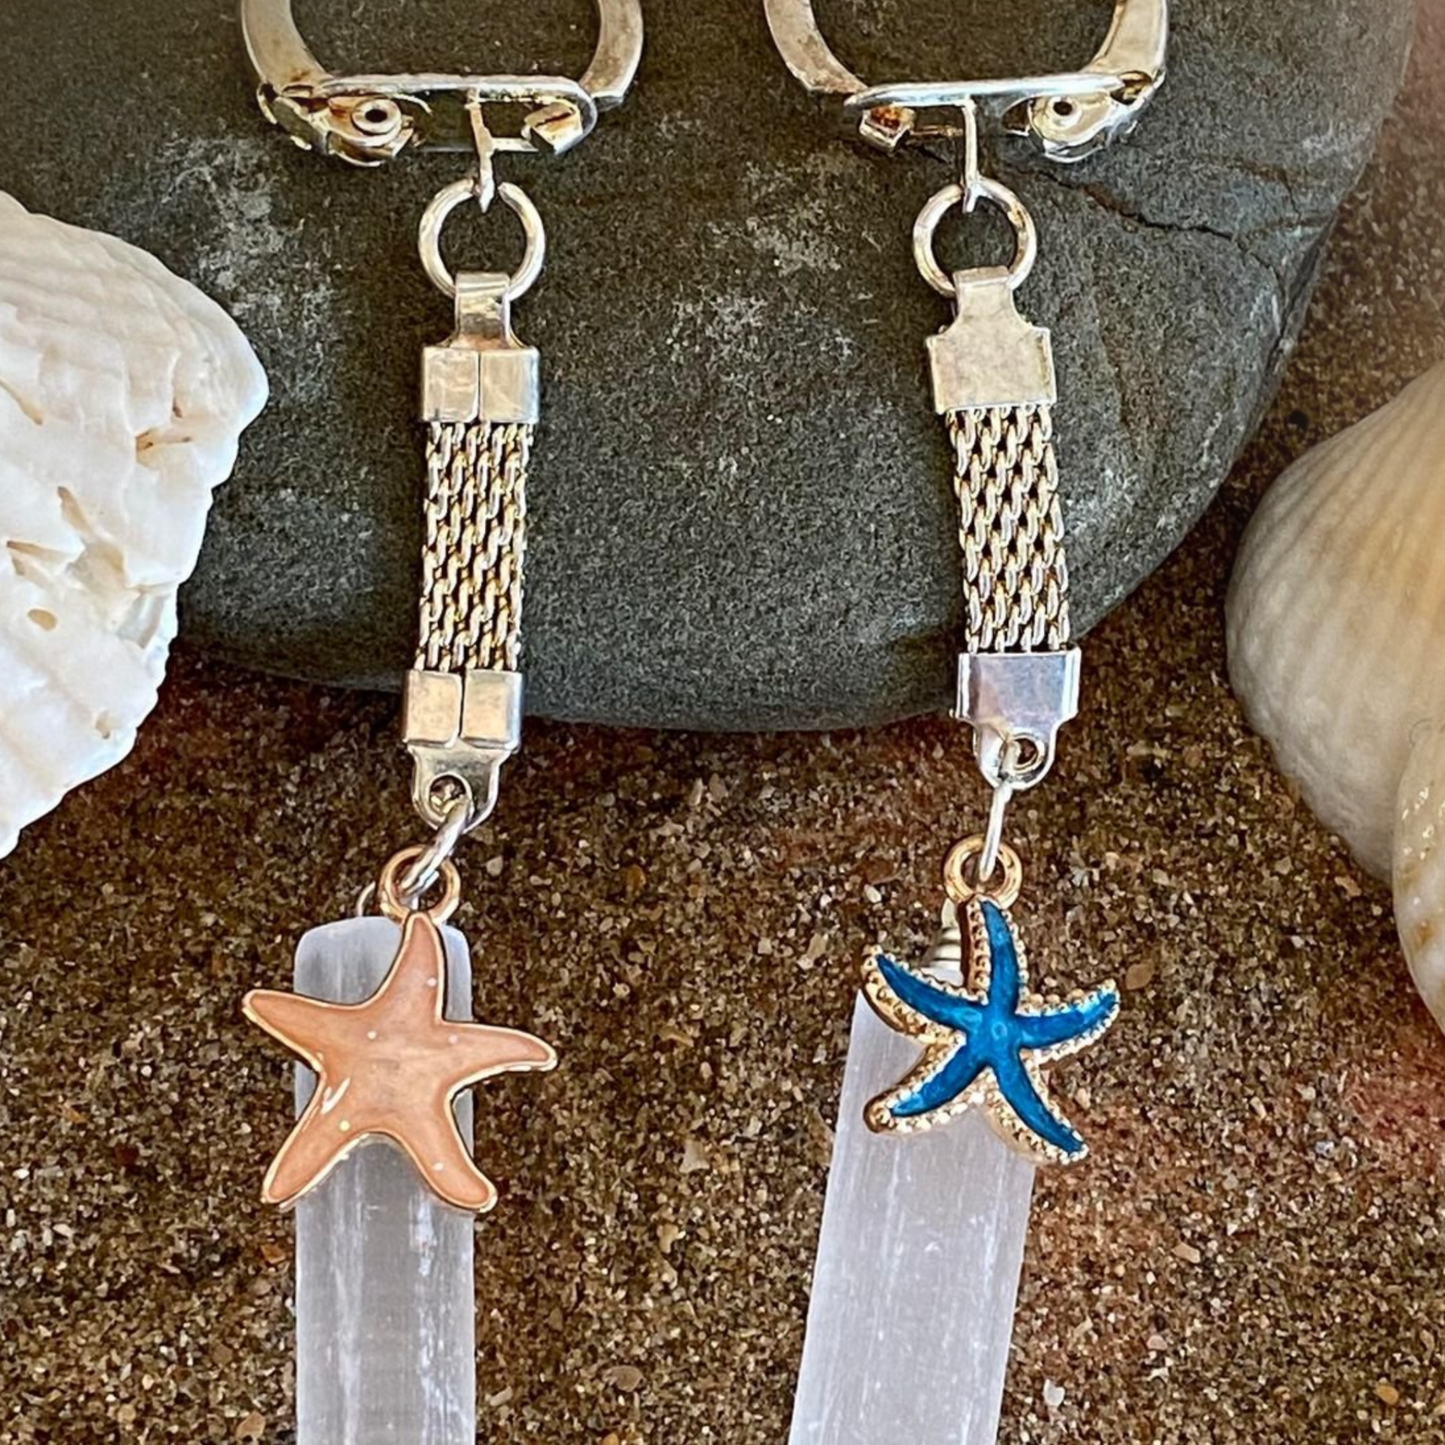 Selenite Key Ring with Apricot or Blue starfish charms